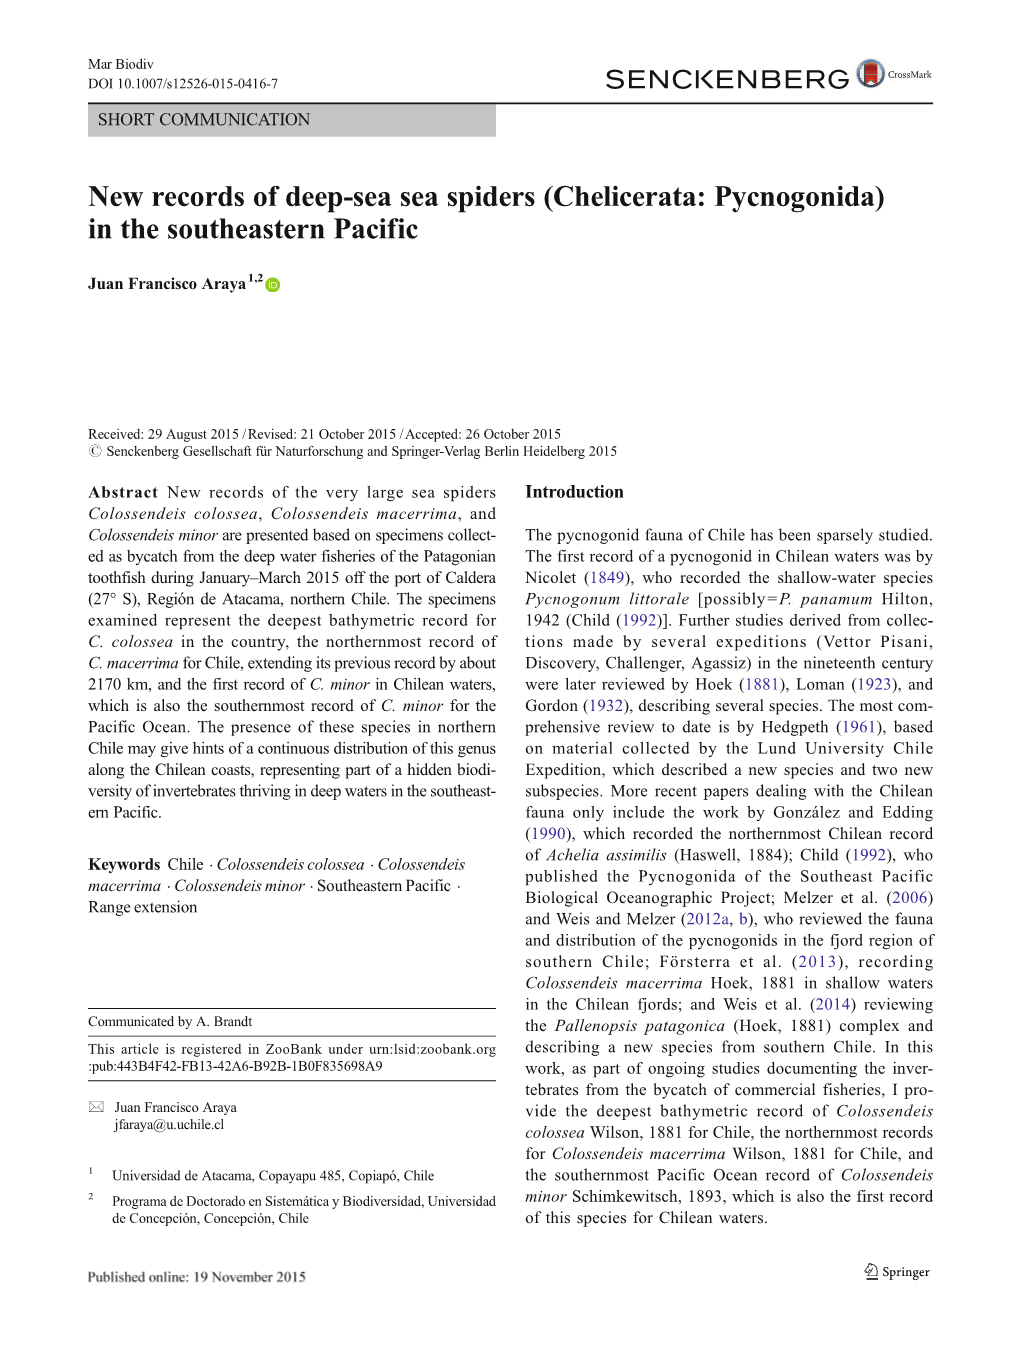 New Records of Deep-Sea Sea Spiders (Chelicerata: Pycnogonida) in the Southeastern Pacific